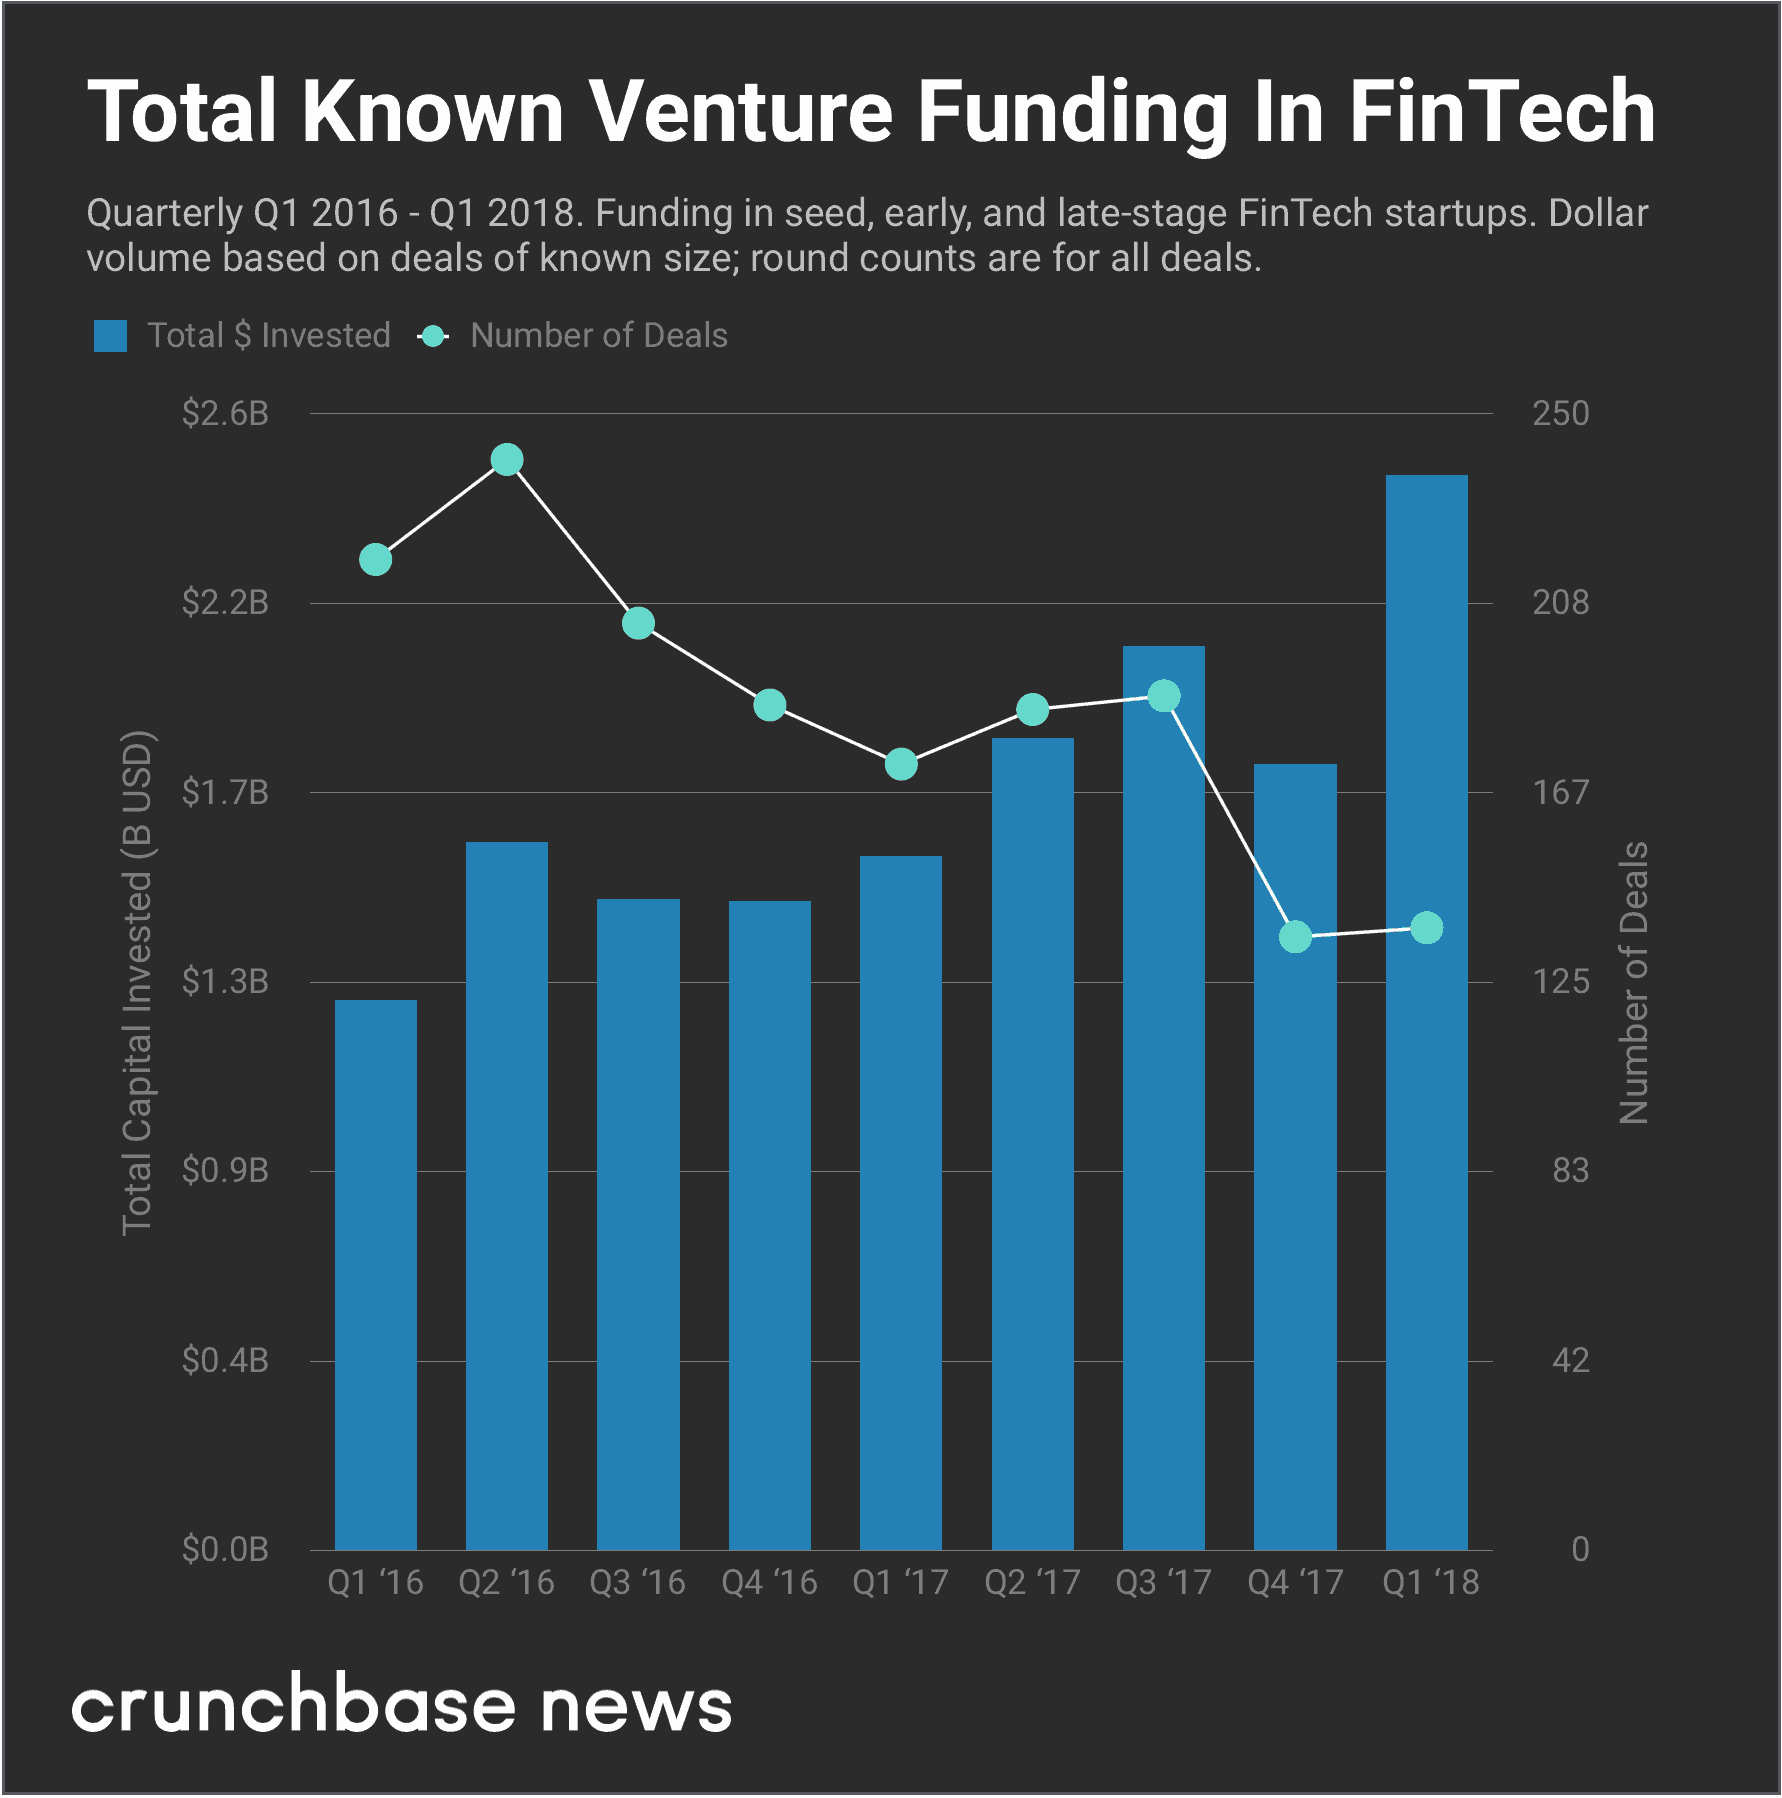 Fintech Trends: An infographic by Crunchbase shares how fintech investing has only risen in the last 2 years.